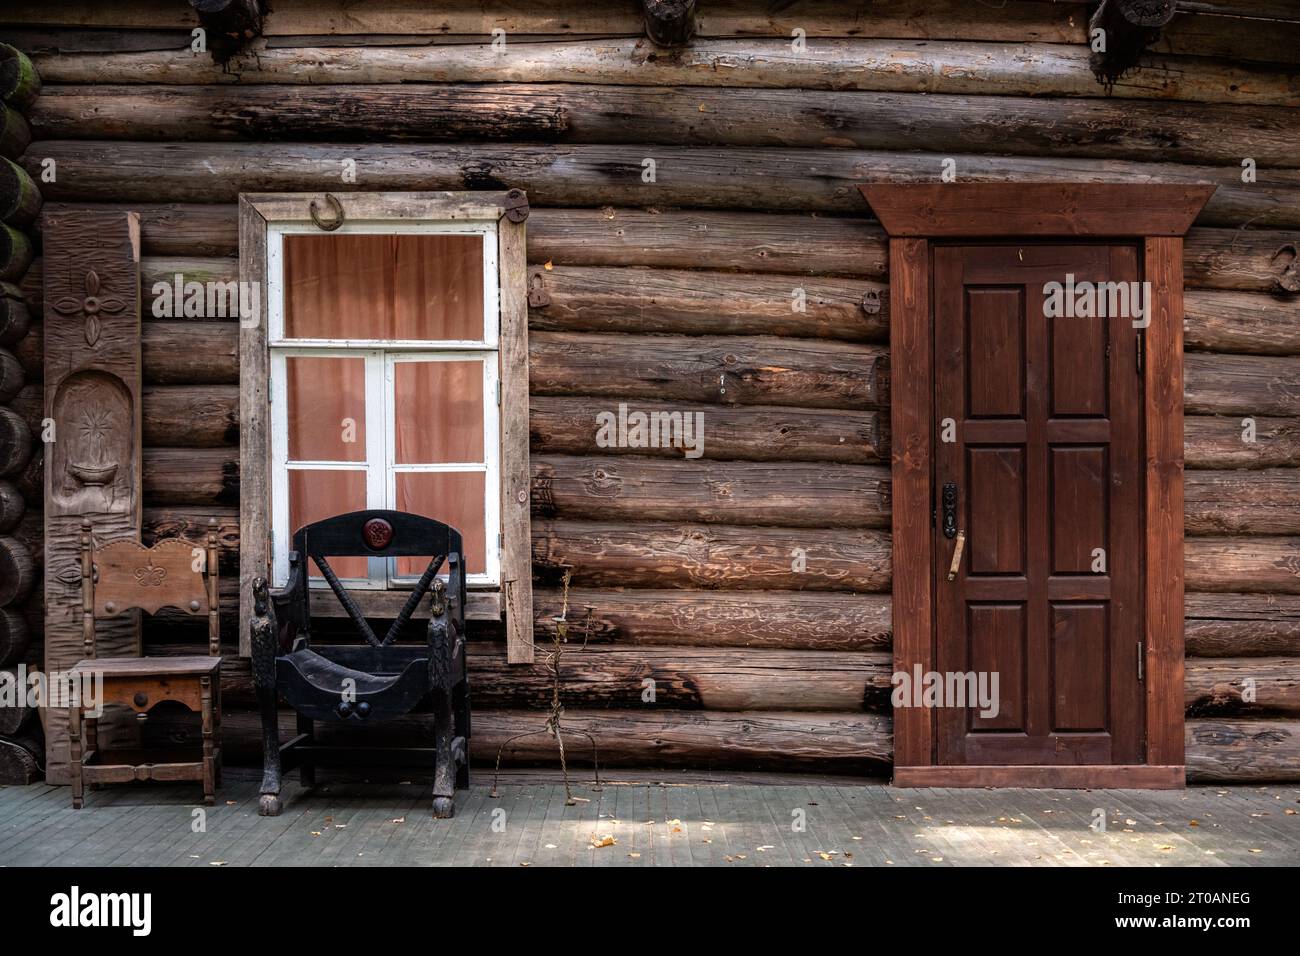 Fragment of a log house with a rectangular window in a white frame, a wooden door and a leather chair. Stock Photo